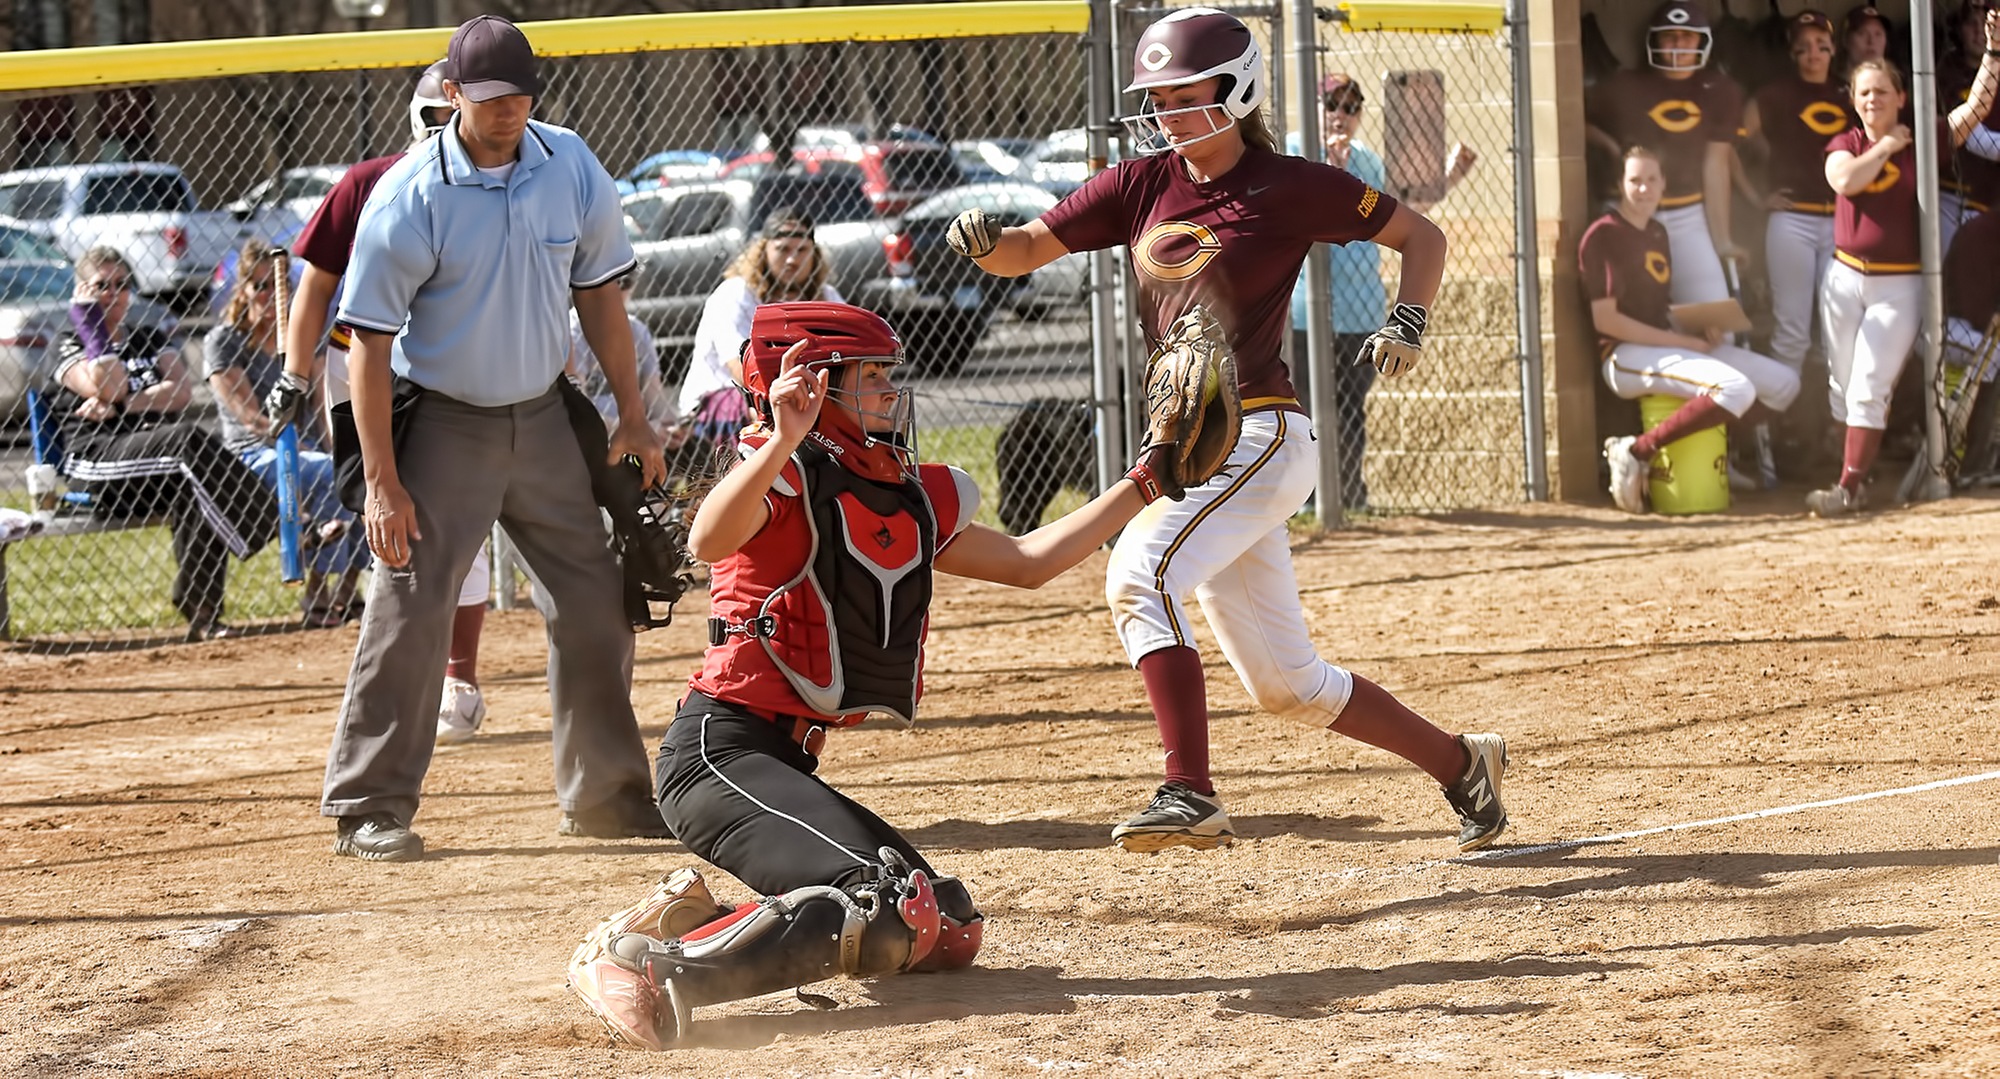 Freshman Maria Pake tries to score from third in the first inning of Game 2 in the Cobbers' DH with St. Benedict.